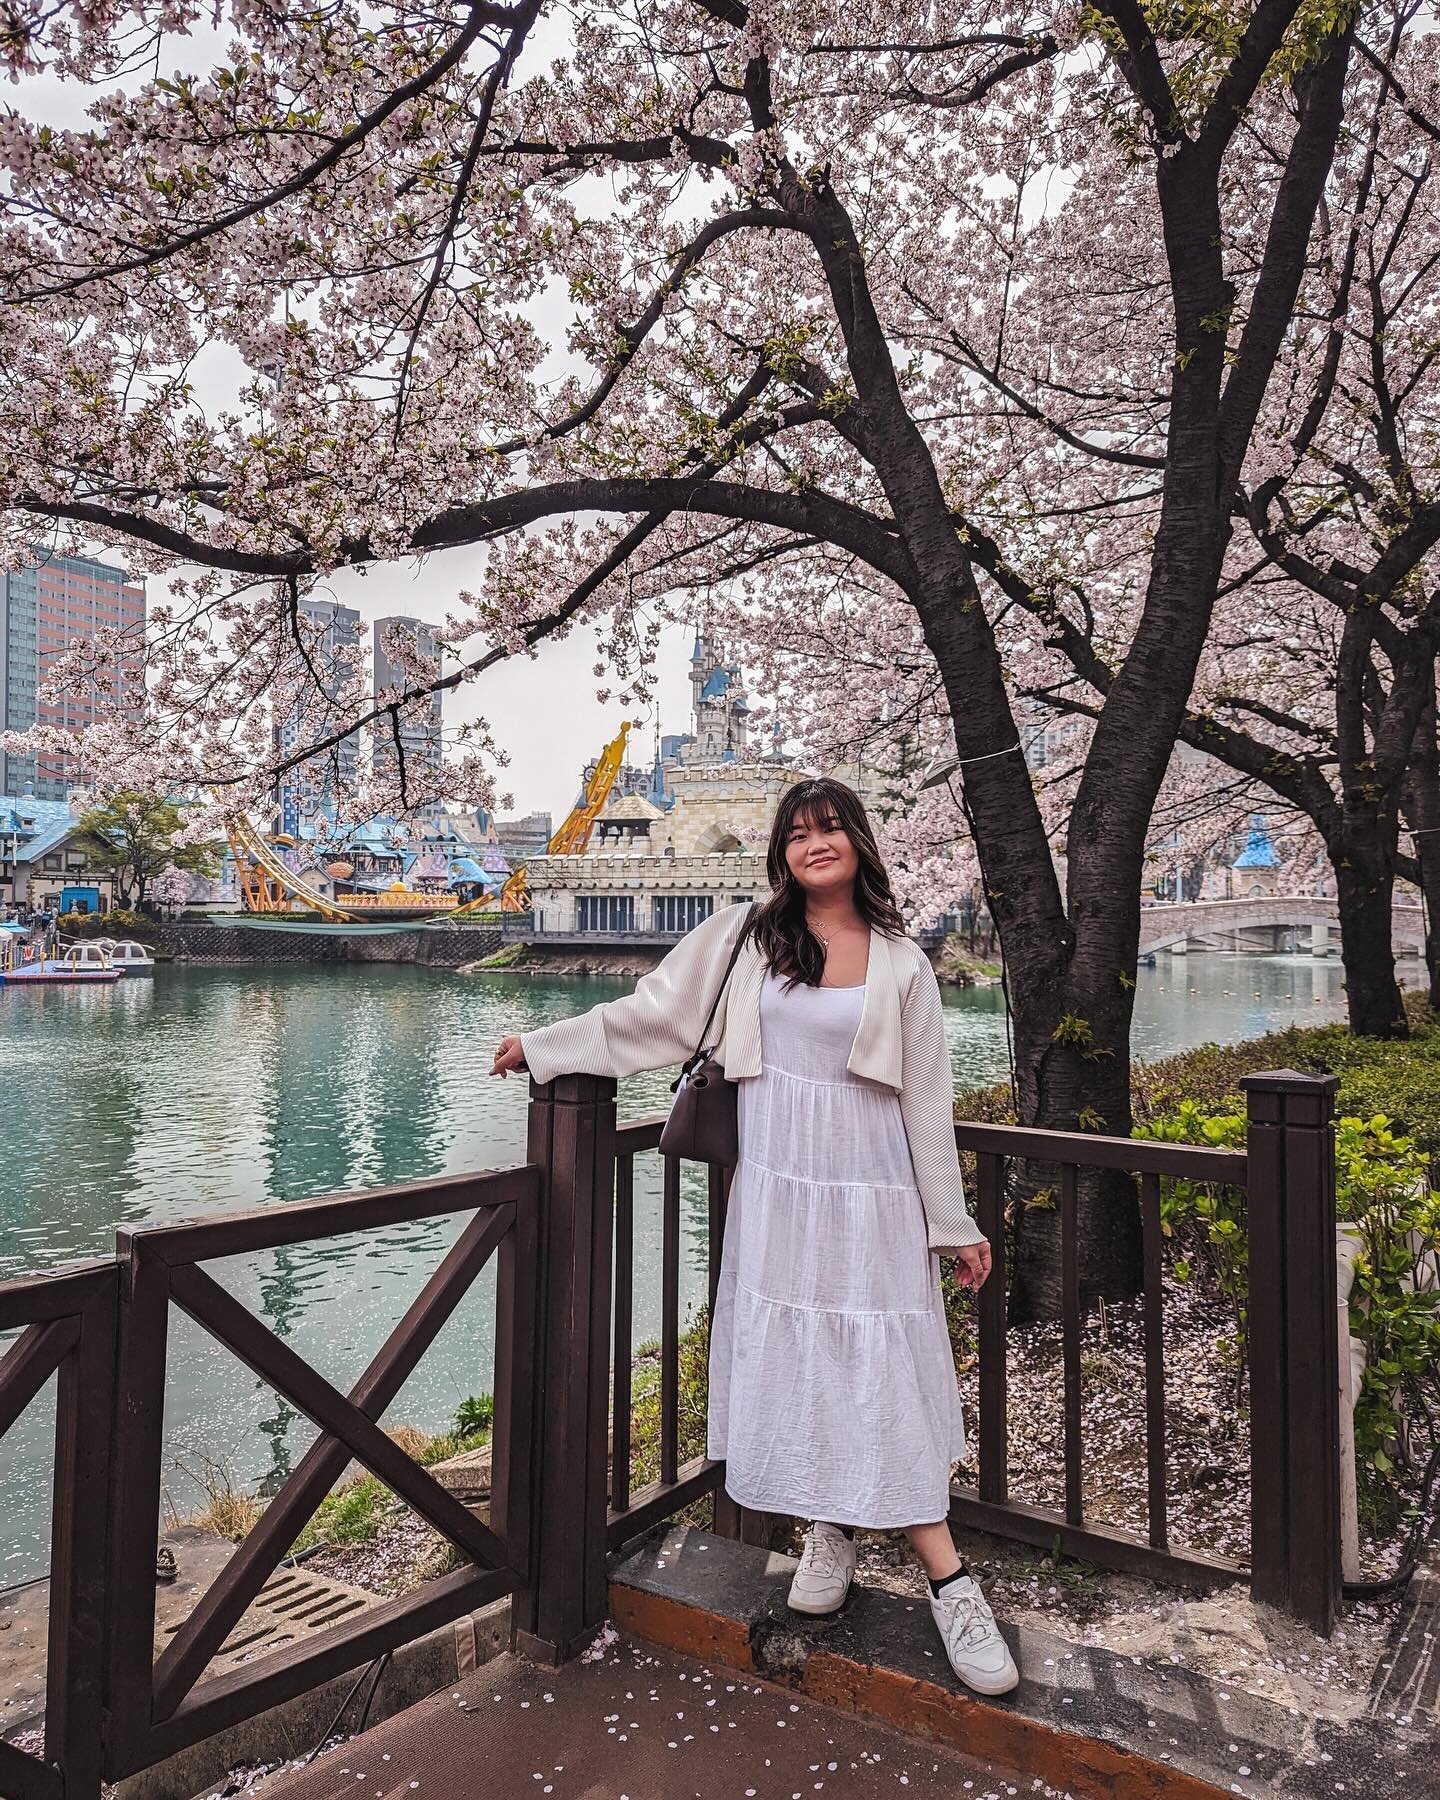 A never-ending pathway of cherry blossoms at Seokchon Lake in Seoul. 🙈🌸 So glad we caught it at full bloom!